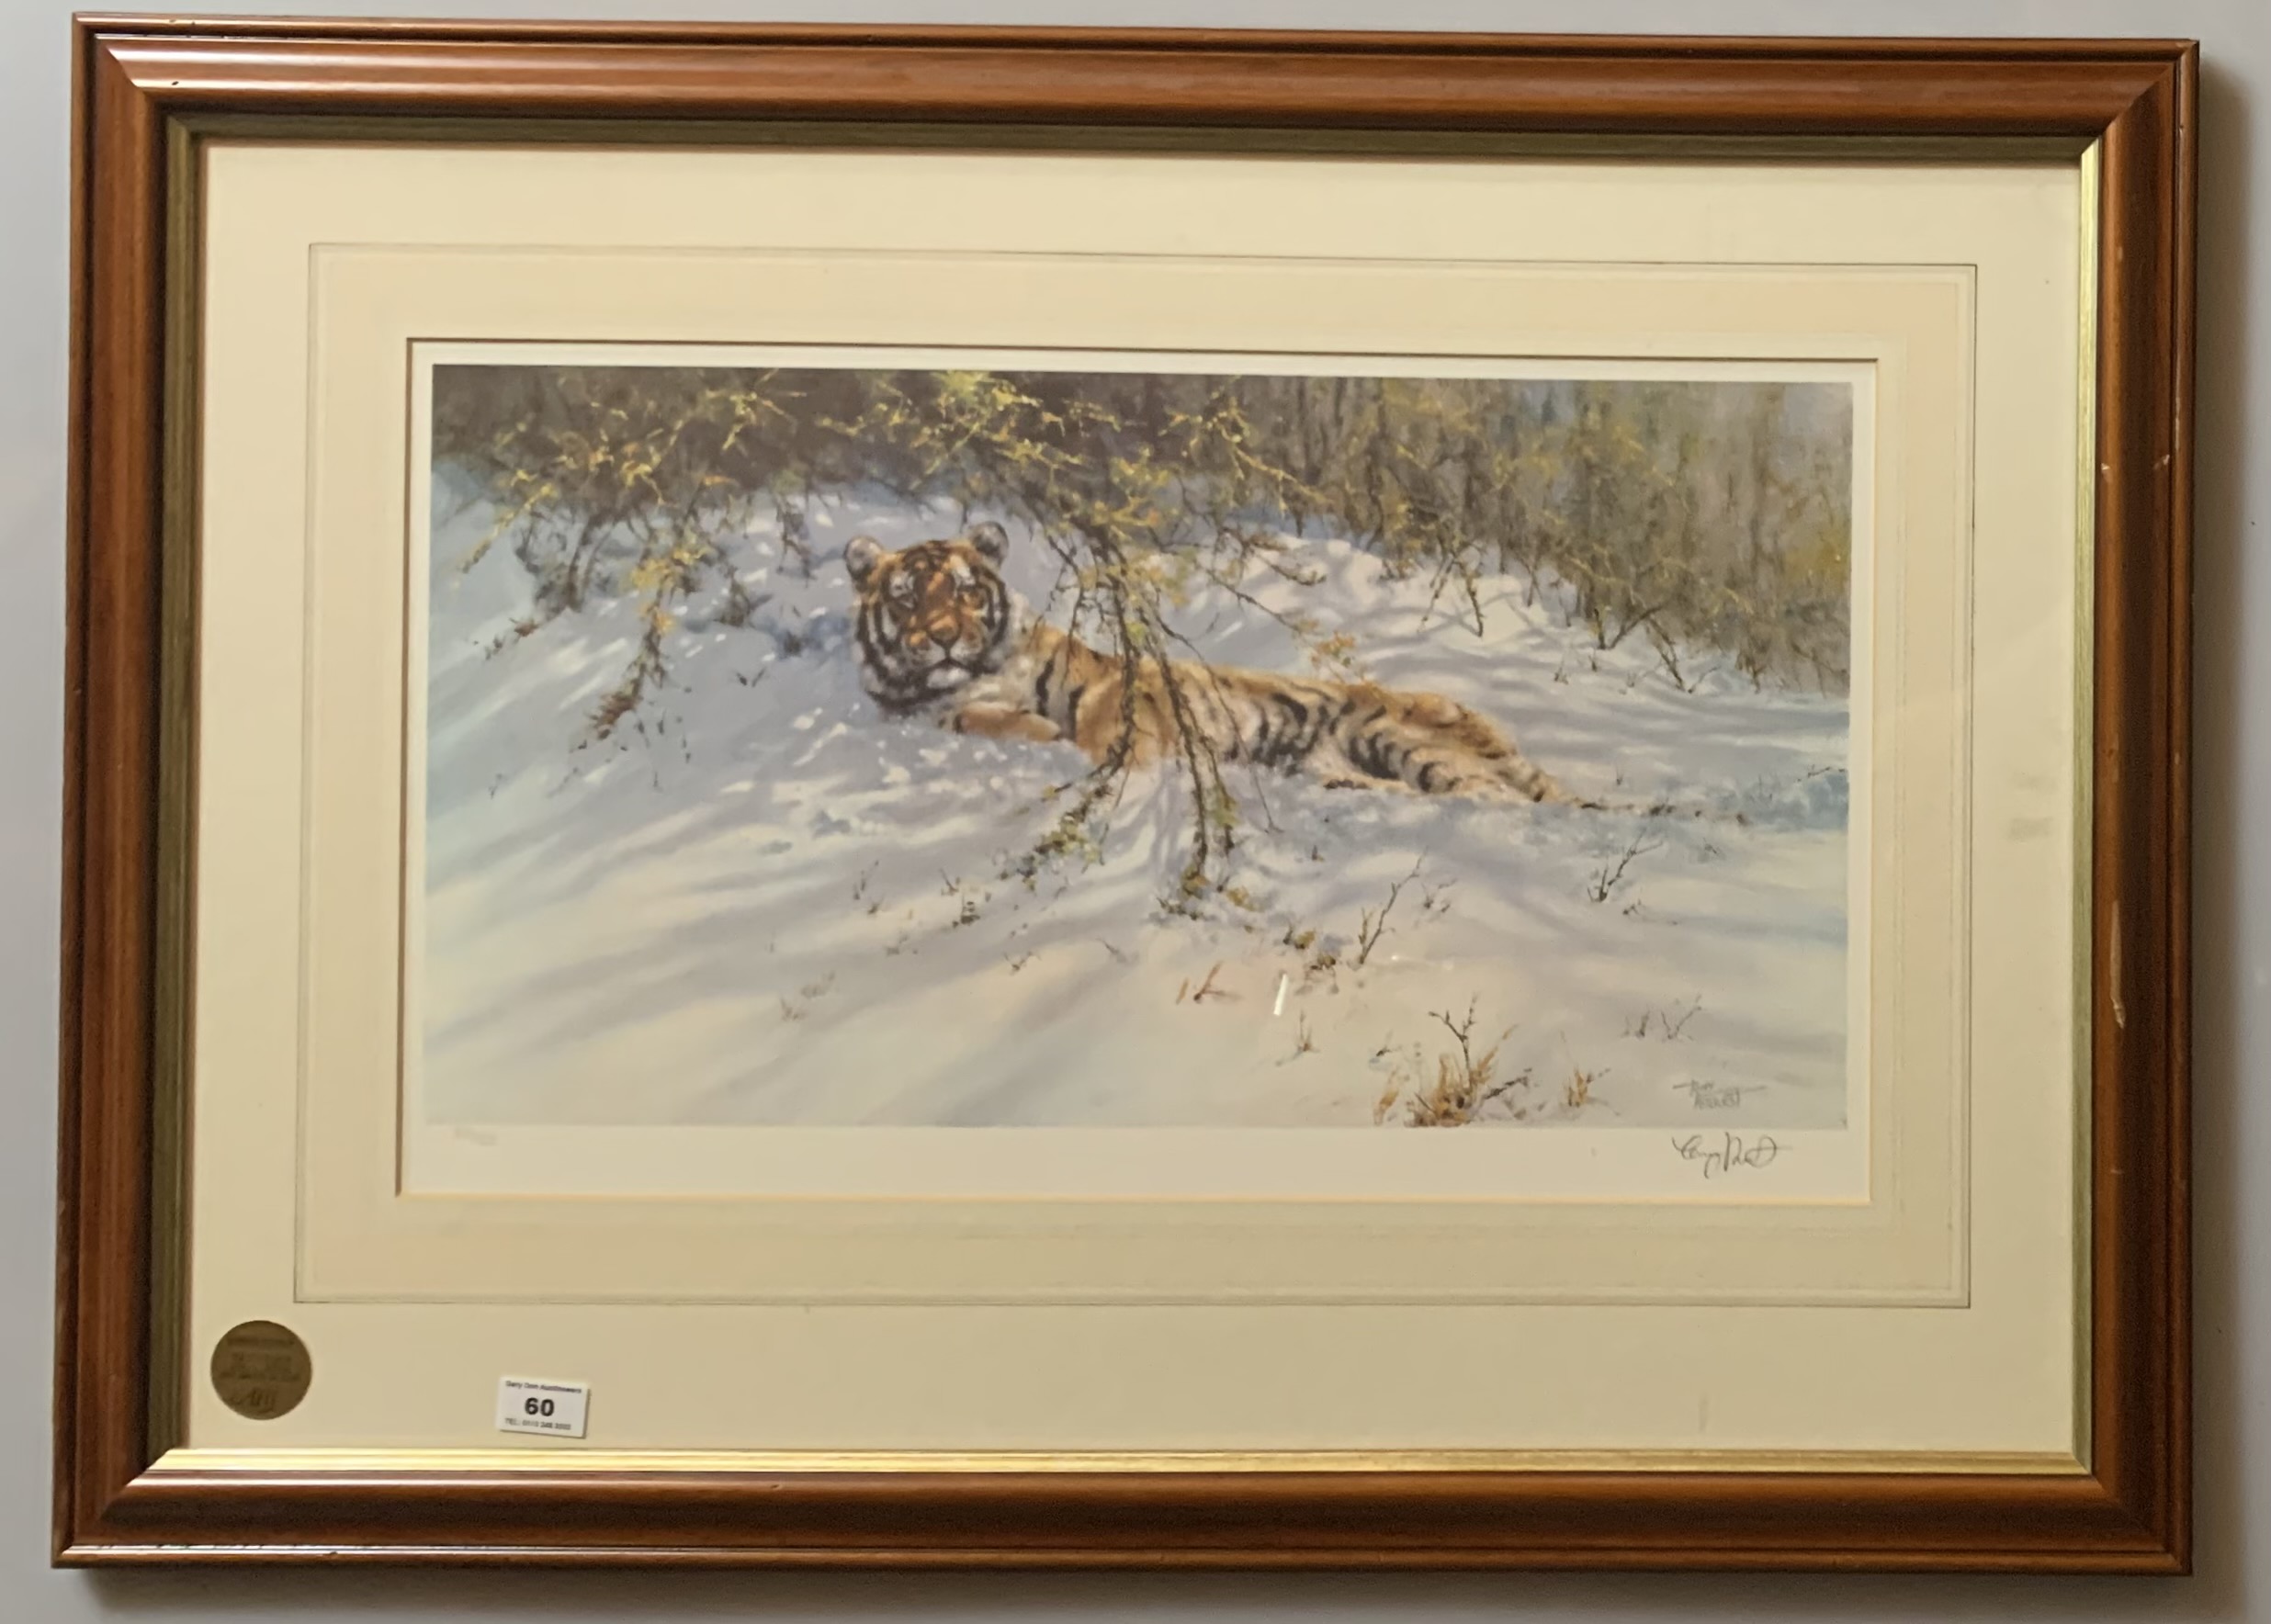 Signed Limited Edition print of tiger by Tony Forrest, No. 244/500. 23” x 13”, frame 33” x 24”.